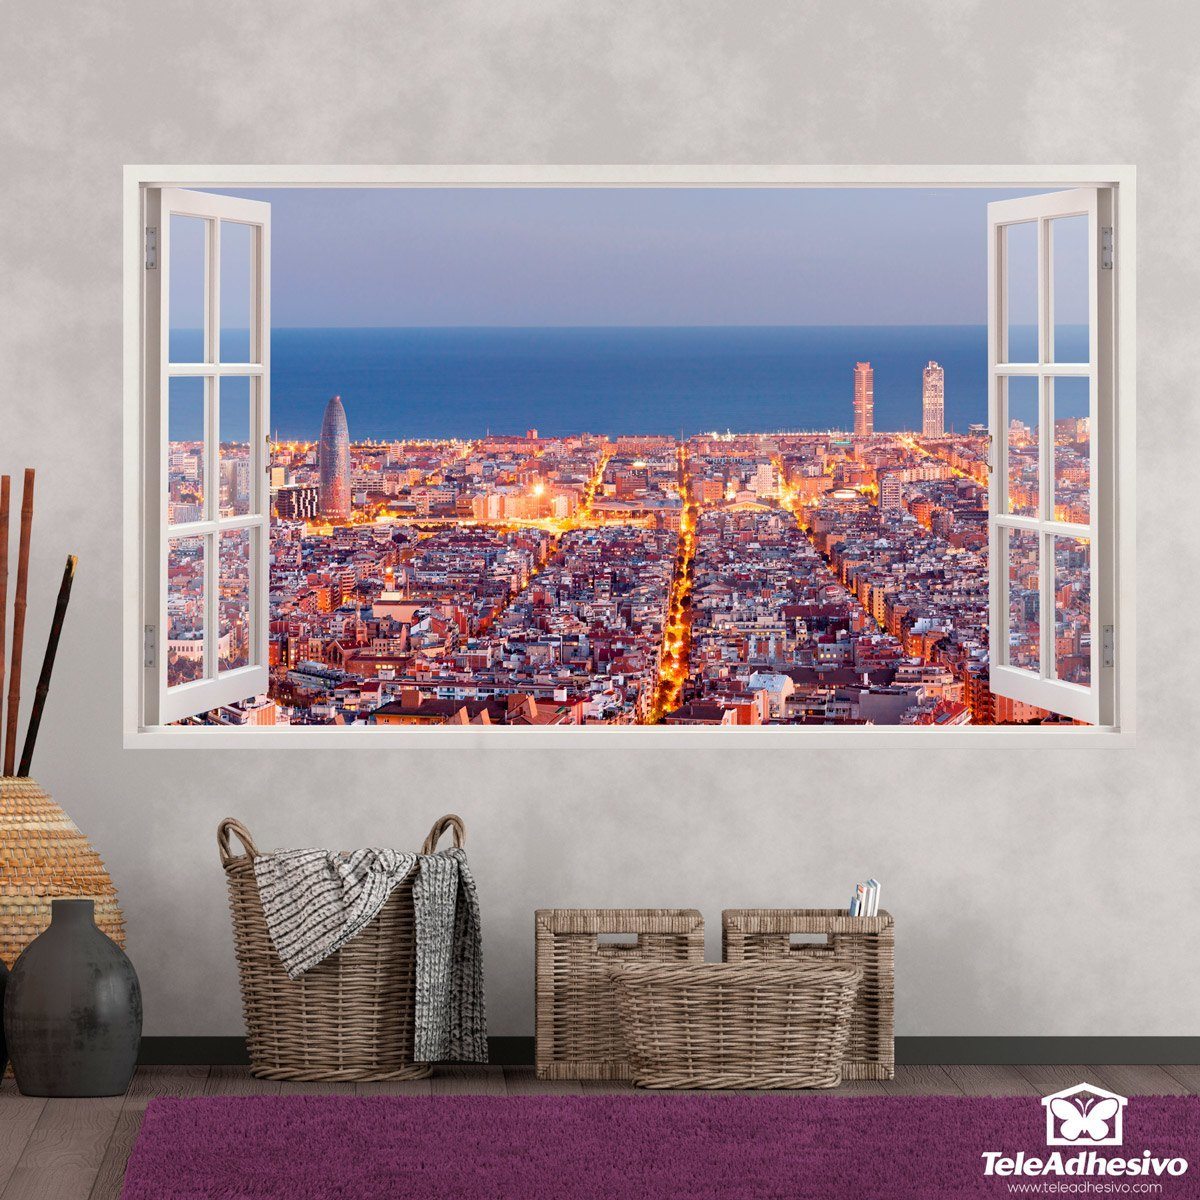 Wall Stickers: Overview of Barcelona